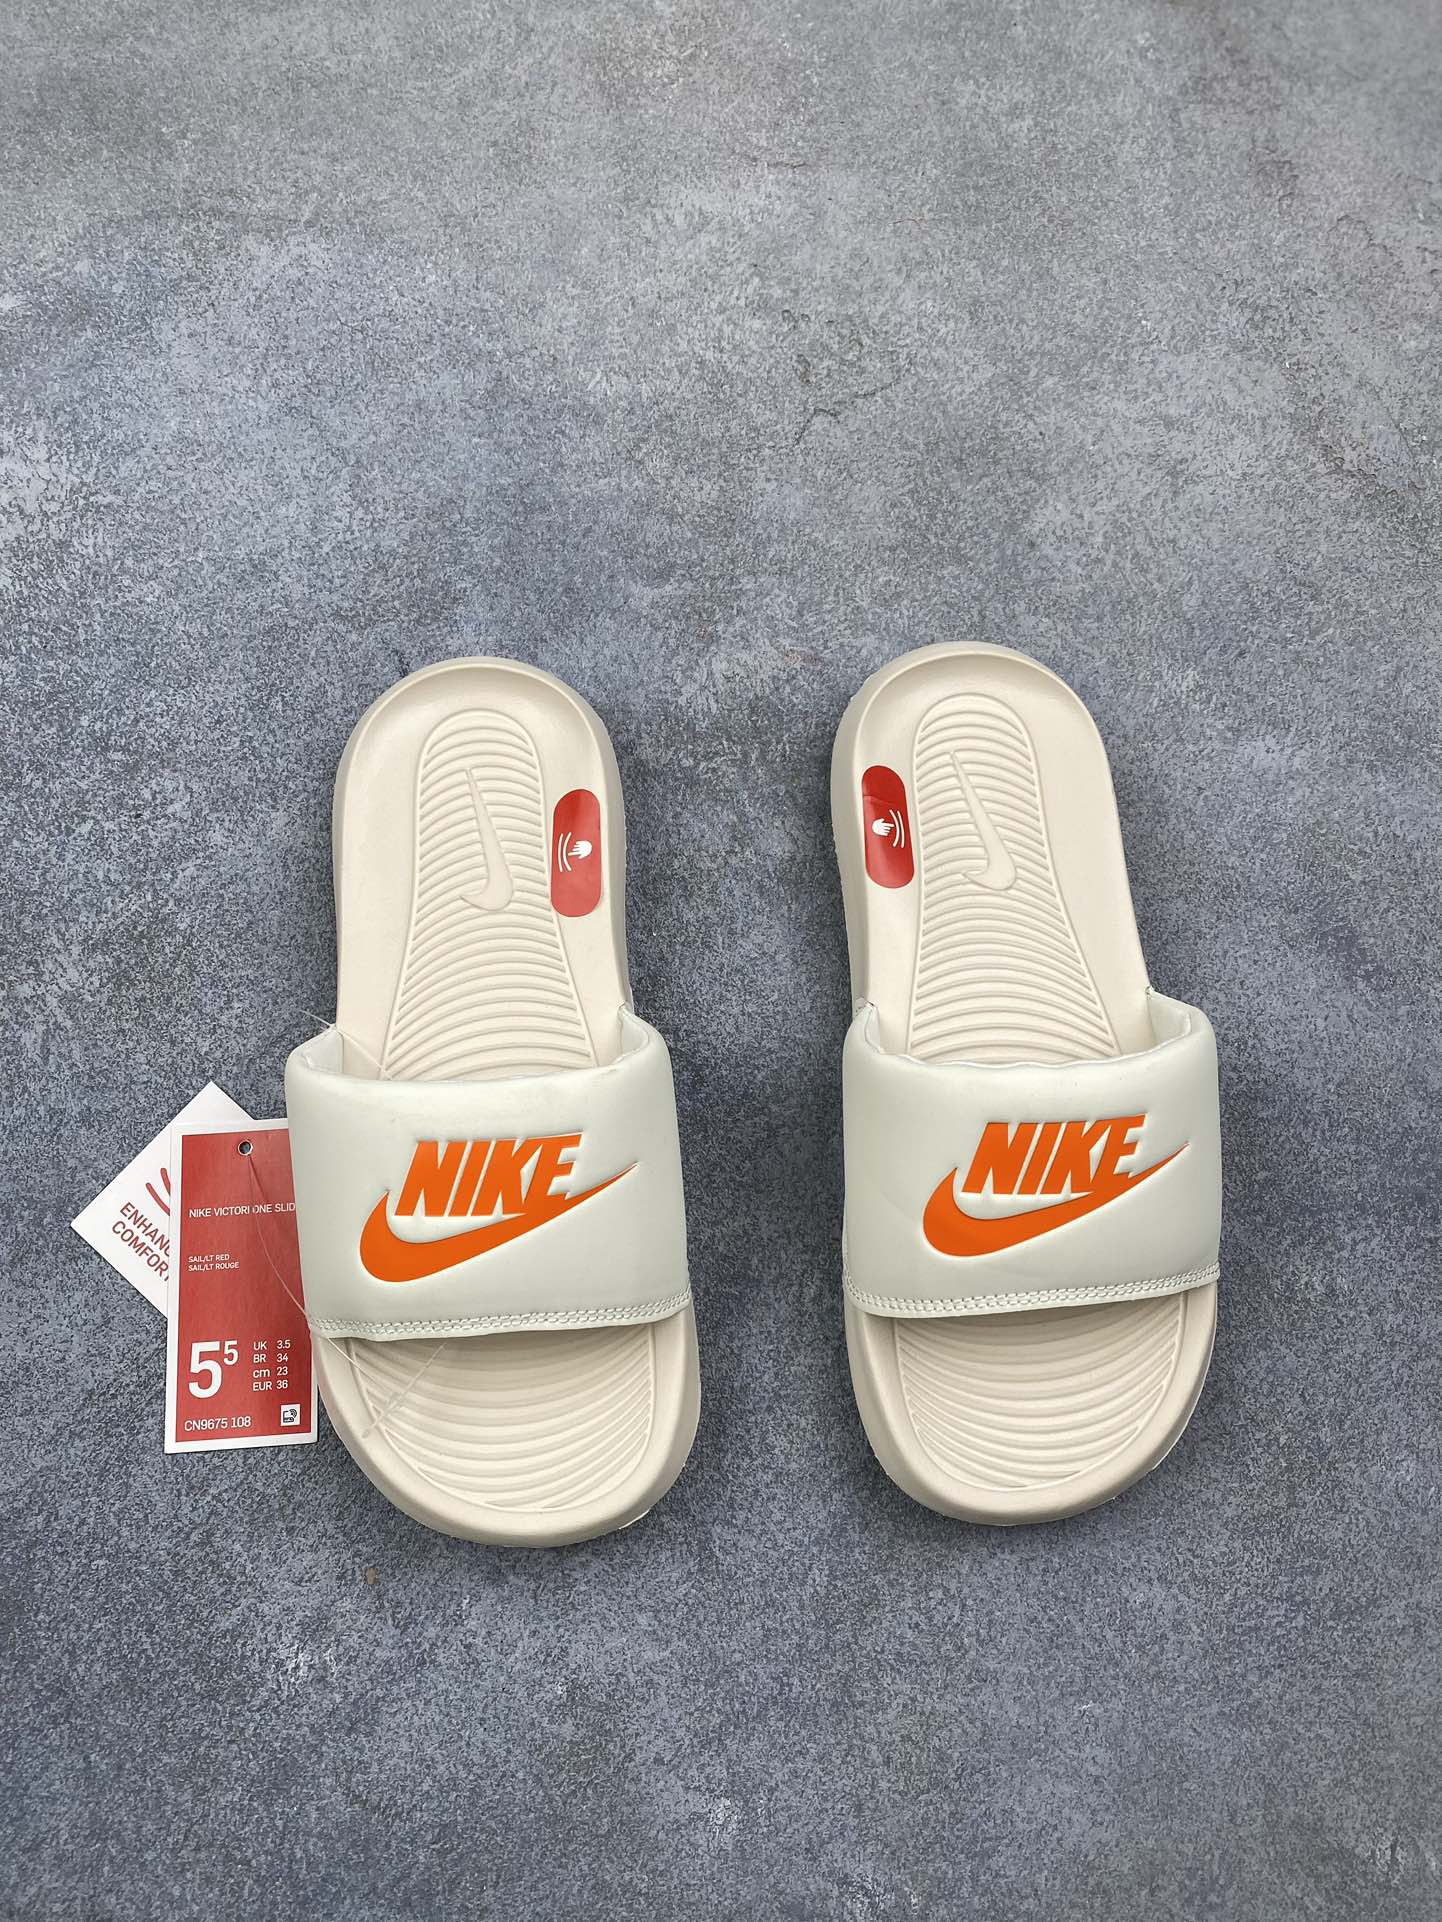 Nike Shoes Slippers Blue Platinum White Summer Collection Beach